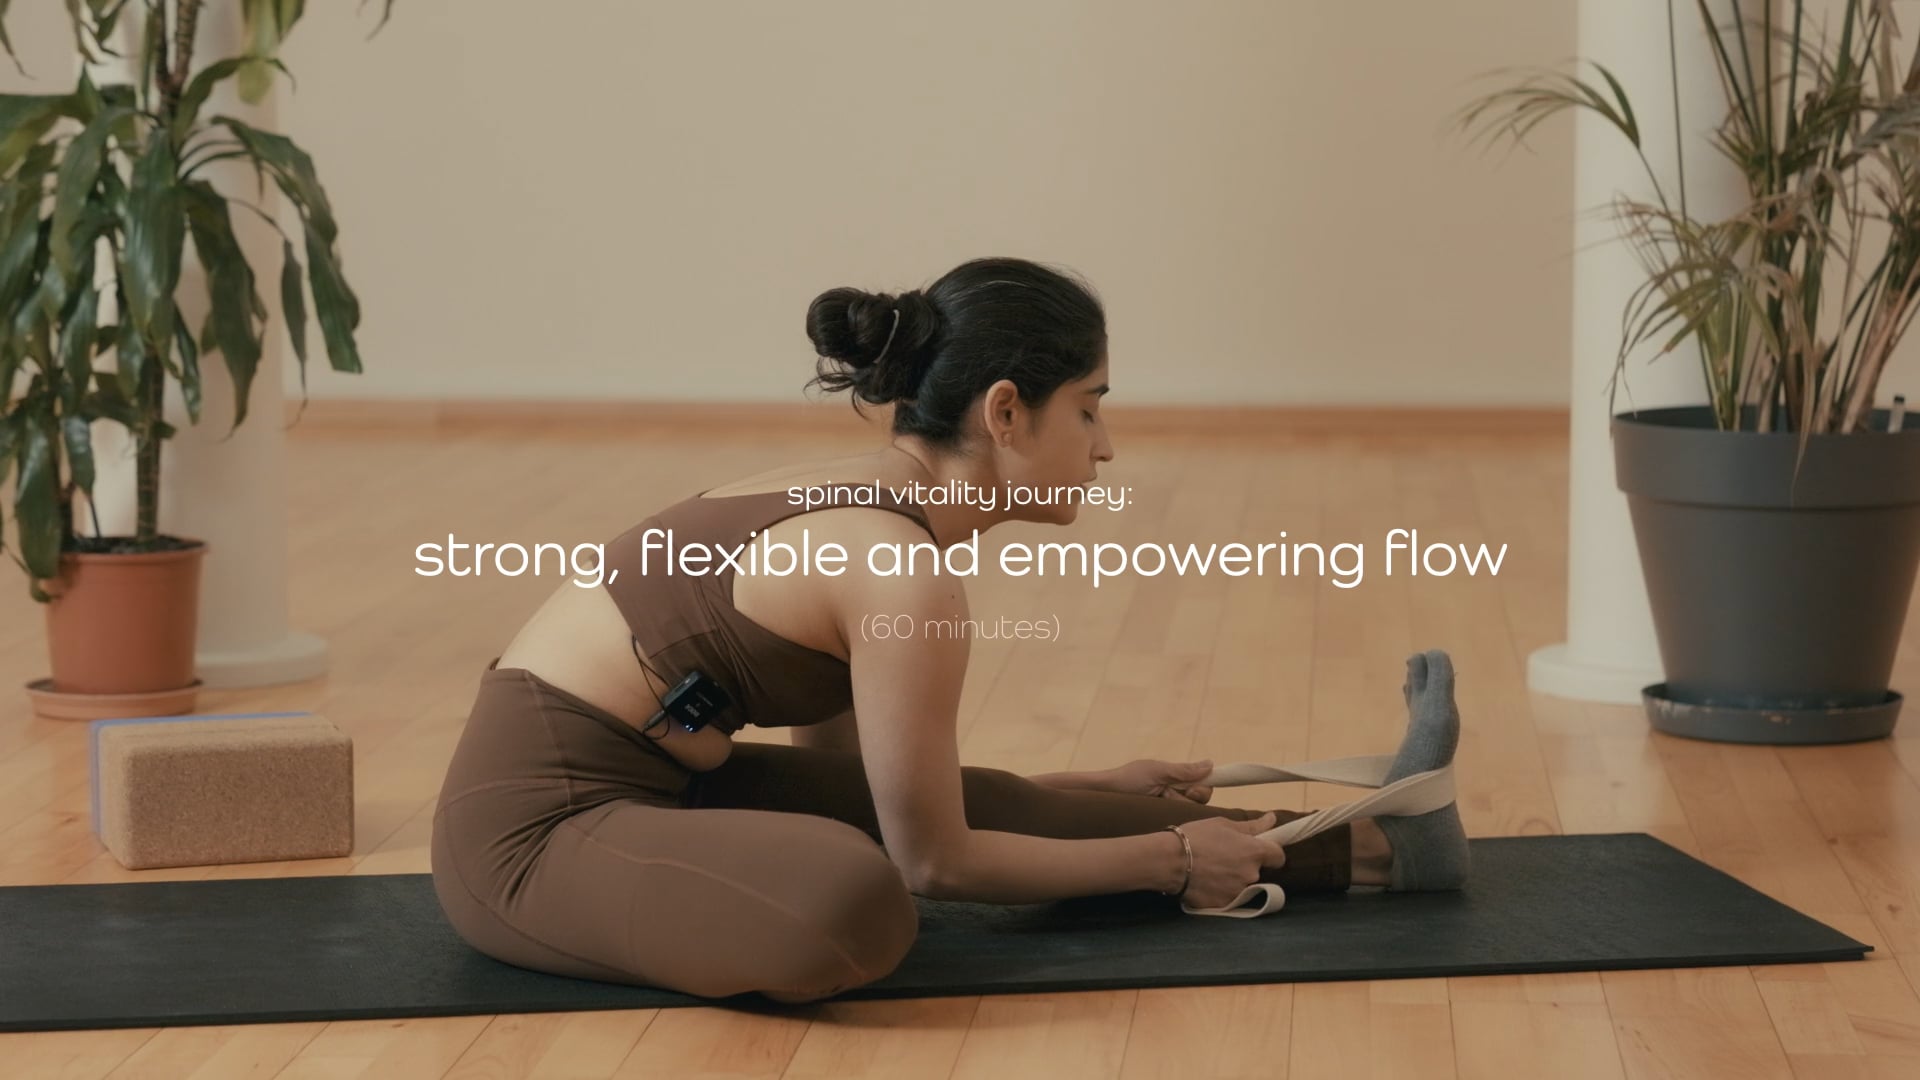 Spinal Vitality Journey: Ignite Strength, Embrace Flexibility, Empower Your Flow – 60 mins